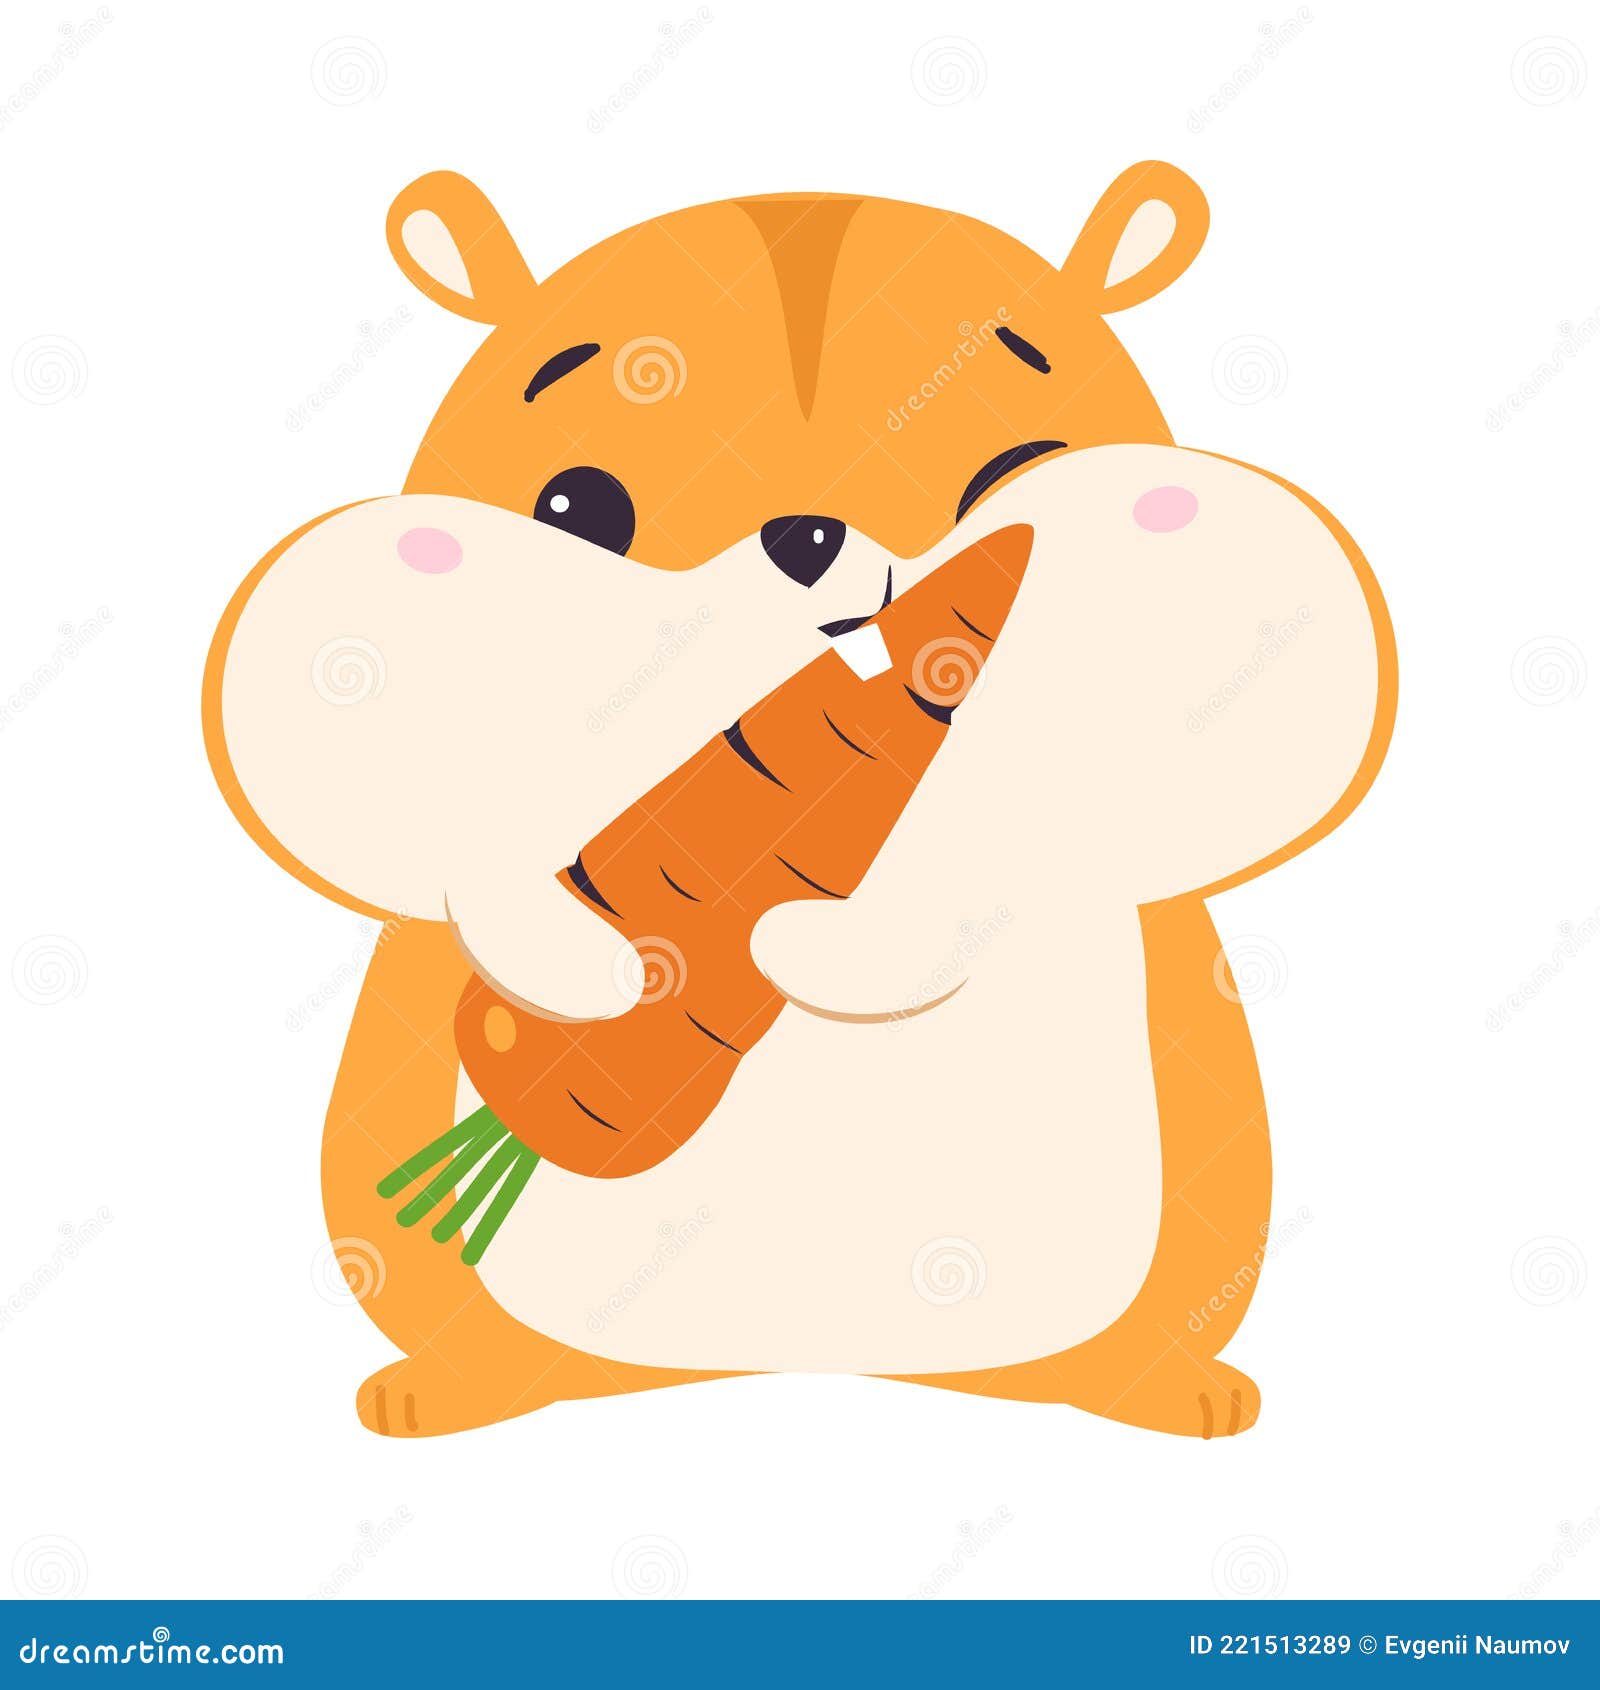 Cute Hamster Eating Carrot, Adorable Funny Pet Animal Character Cartoon  Vector Illustration Stock Vector - Illustration of curious, funny: 221513289